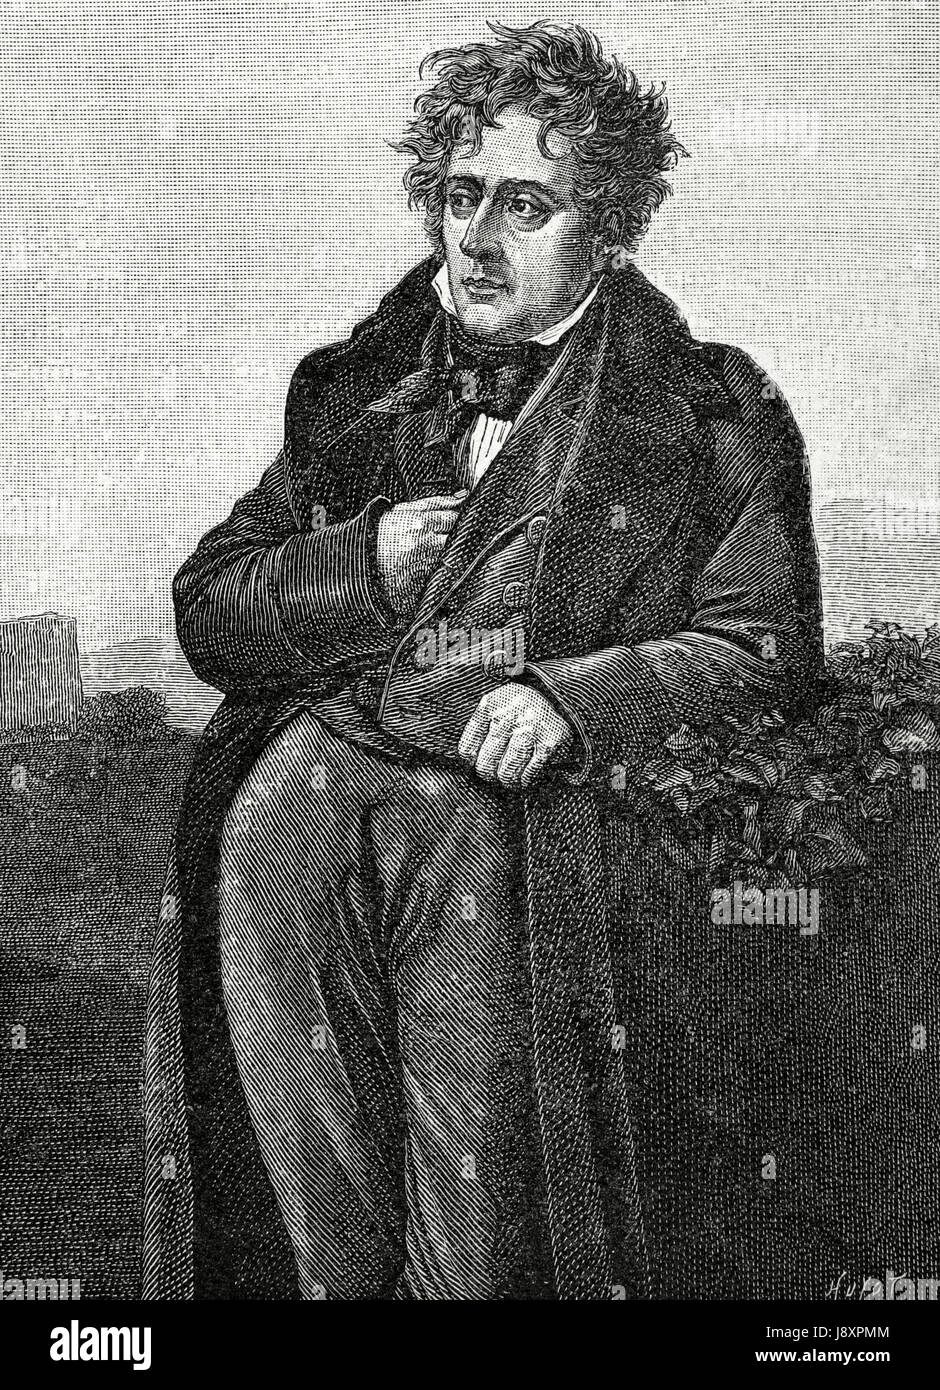 Chateaubriand, François Rene, Vicomte de (1768-1848). French writer and member of the French Academy (1811). Portrait. engraving by Huyot. 'Historia de Francia', 1883. Stock Photo